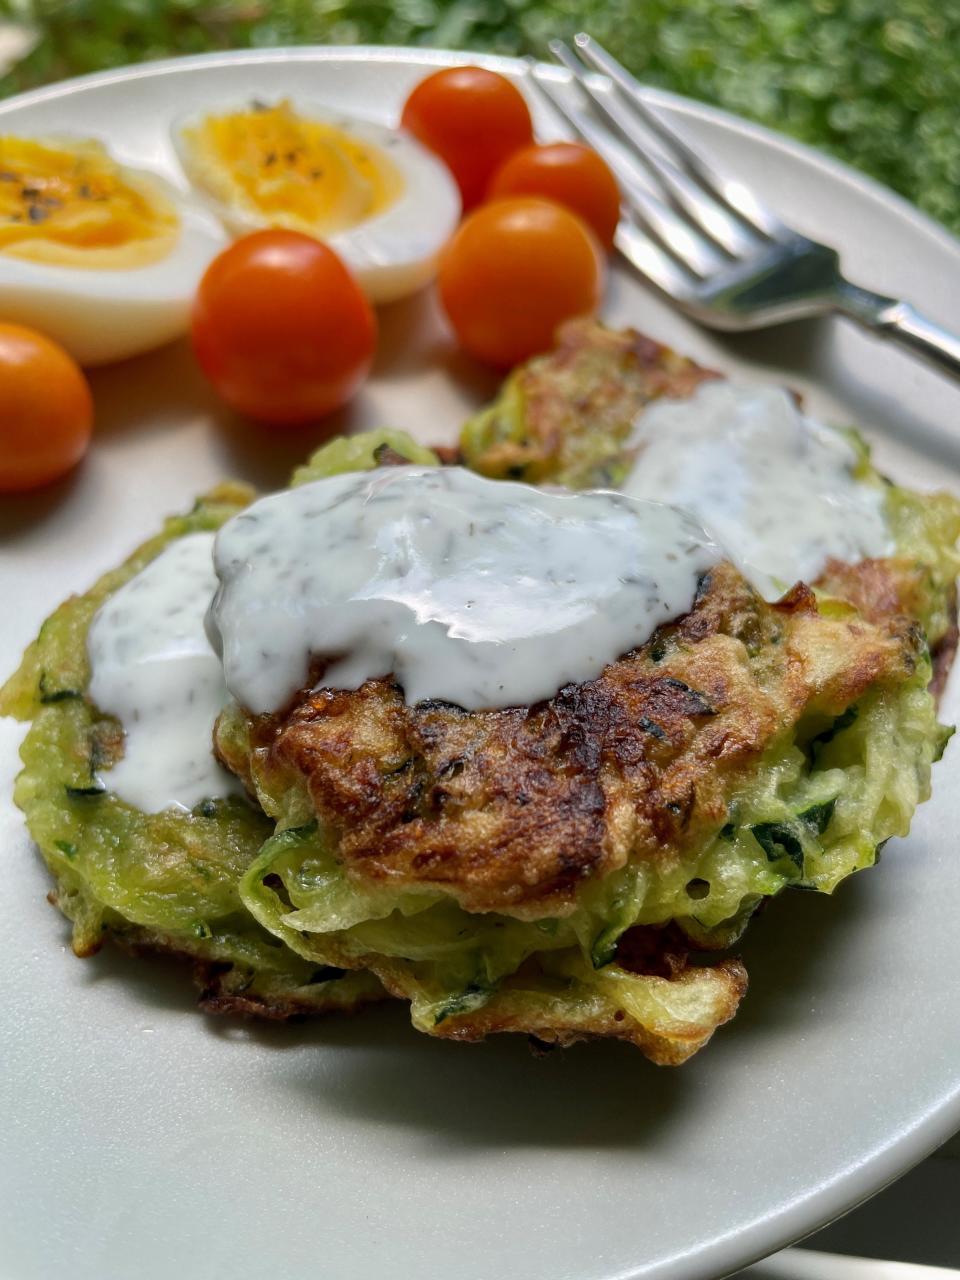 Zucchini fritters are a fresh take on a vegetable that seems to be never ending in some gardens.